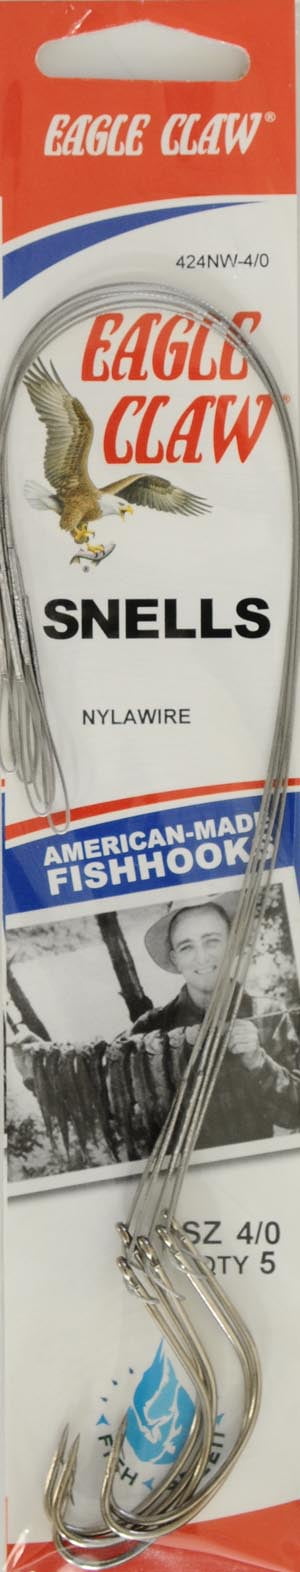 Eagle Claw 424NWH-1/0 Nylawirewith Kahle Hook, Nickel, Size 1/0, 5 Pack 